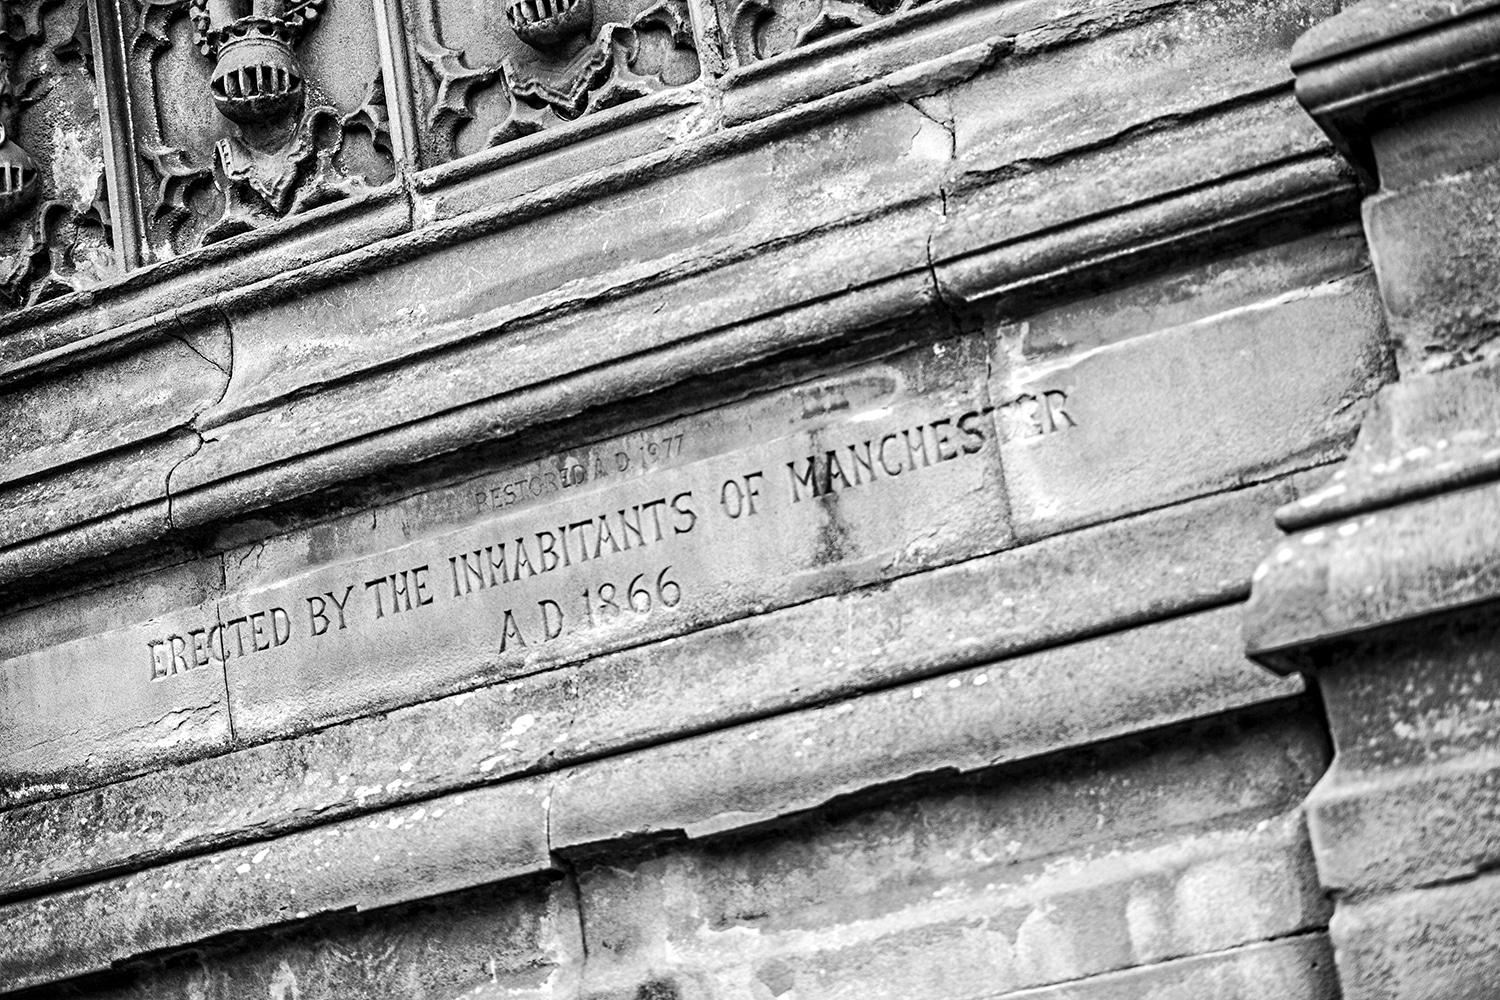 Erected by the inhabitants of Manchester Manchester Landscapes Architecture 2